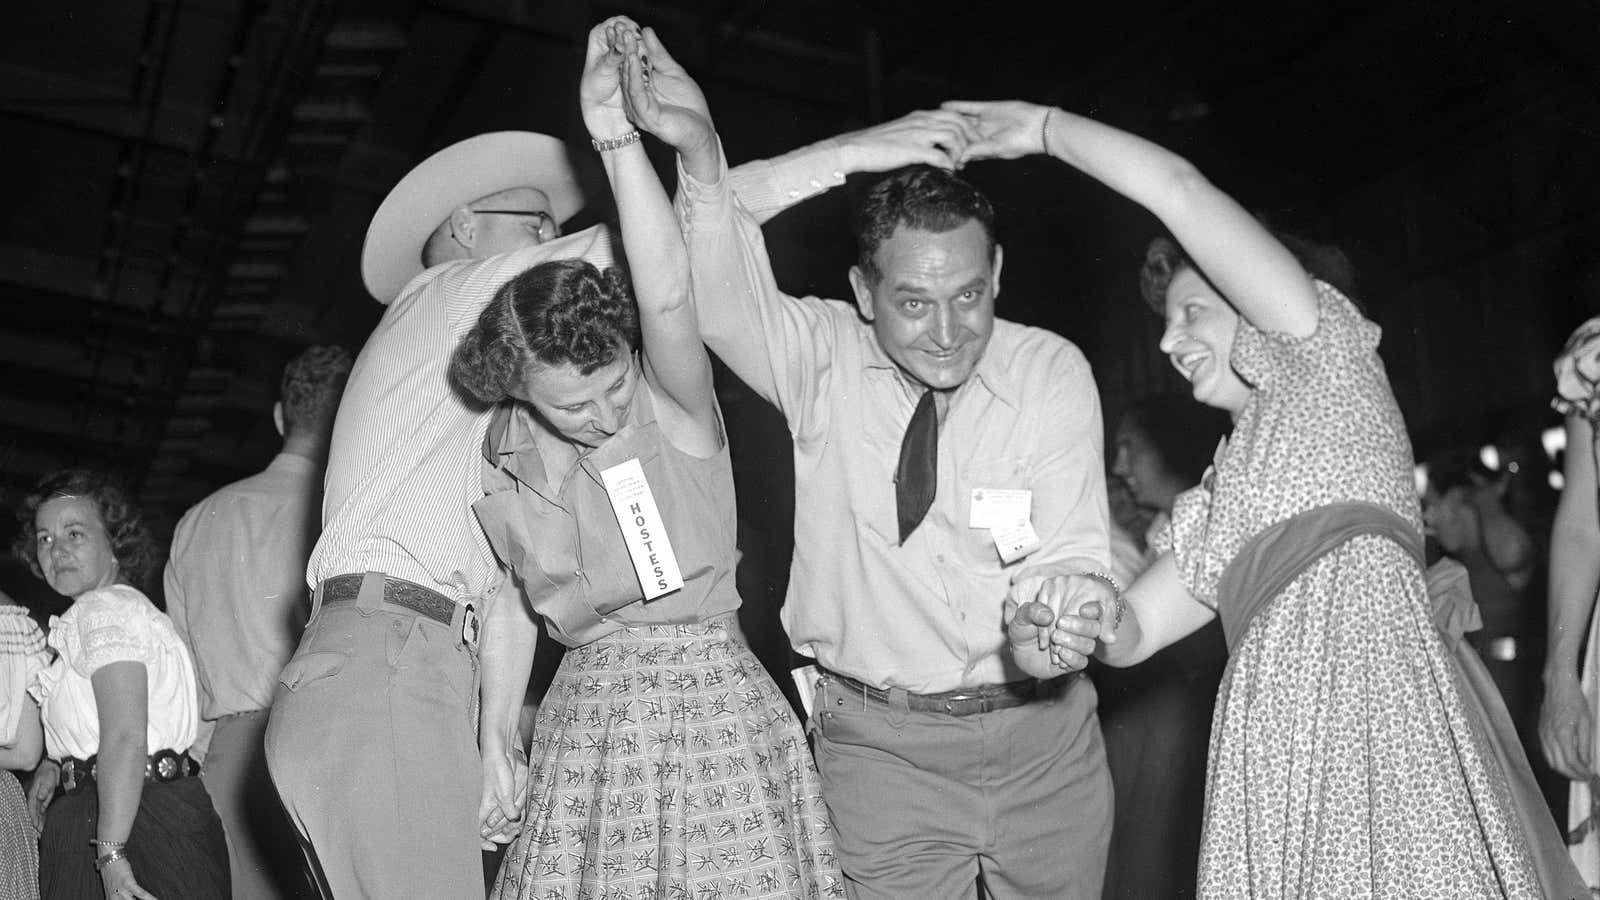 Square Dancing: 7 Most Popular Square Dancing Styles - Square Up